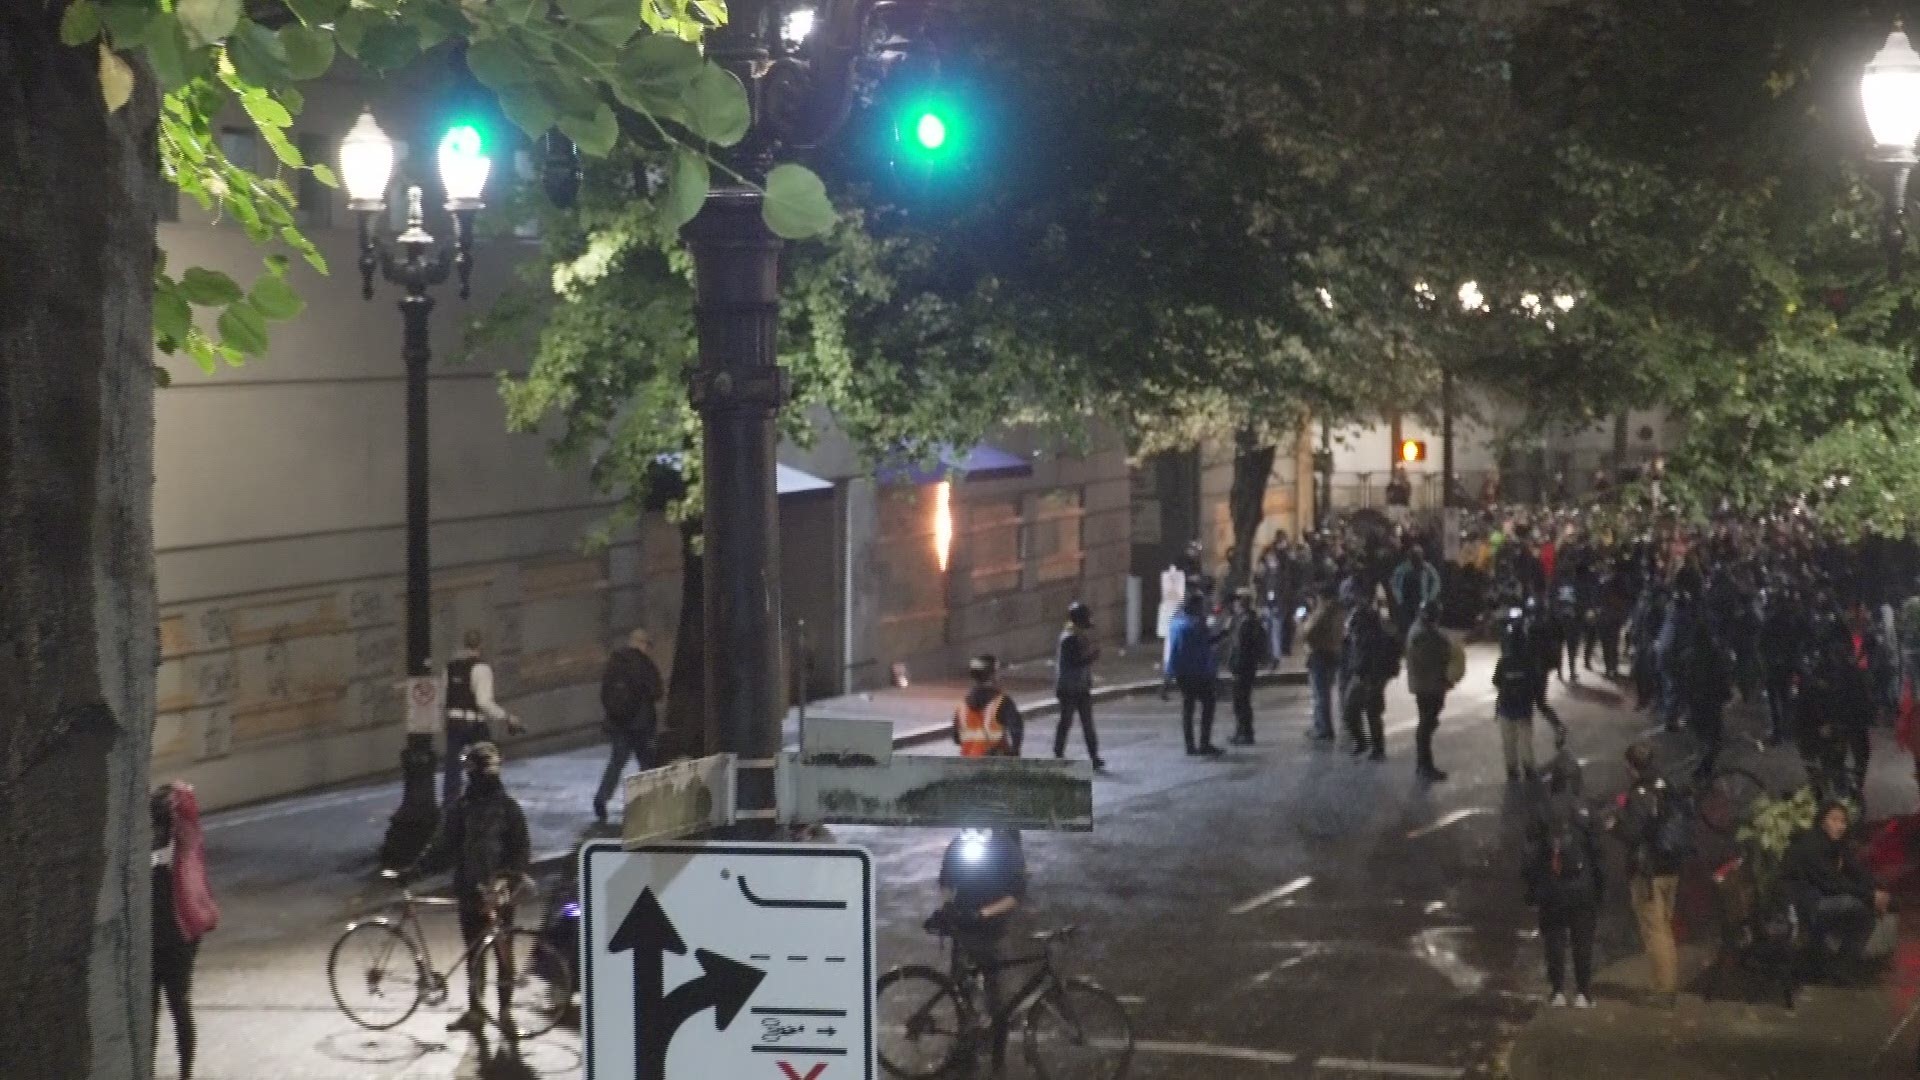 During a riot in downtown Portland on Wednesday, Sept. 23, the Central Precinct was set on fire and a molotov cocktail was thrown at officers.